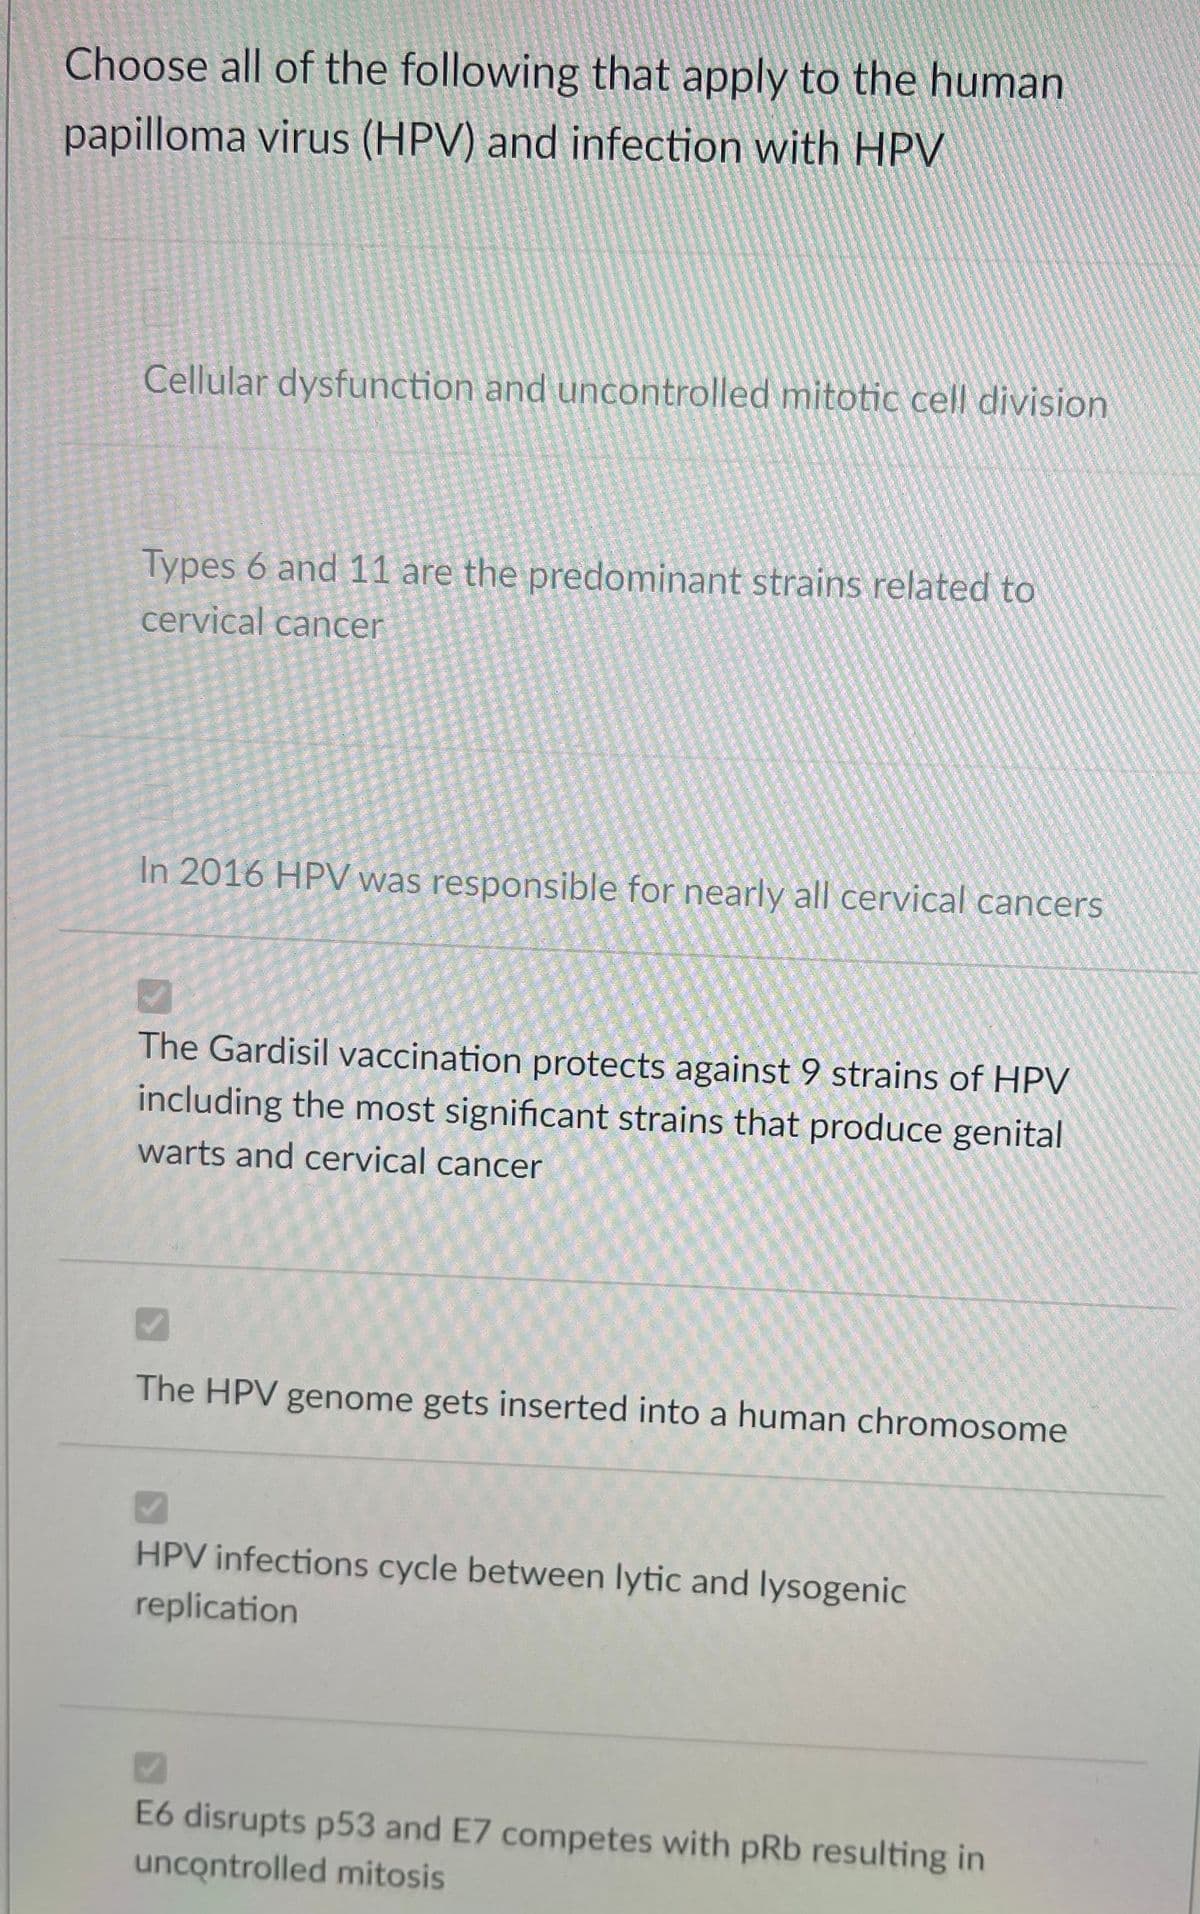 Choose all of the following that apply to the human
papilloma virus (HPV) and infection with HPV
Cellular dysfunction and uncontrolled mitotic cell division
Types 6 and 11 are the predominant strains related to
cervical cancer
In 2016 HPV was responsible for nearly all cervical cancers
The Gardisil vaccination protects against 9 strains of HPV
including the most significant strains that produce genital
warts and cervical cancer
The HPV genome gets inserted into a human chromosome
HPV infections cycle between lytic and lysogenic
replication
E6 disrupts p53 and E7 competes with pRb resulting in
uncontrolled mitosis
